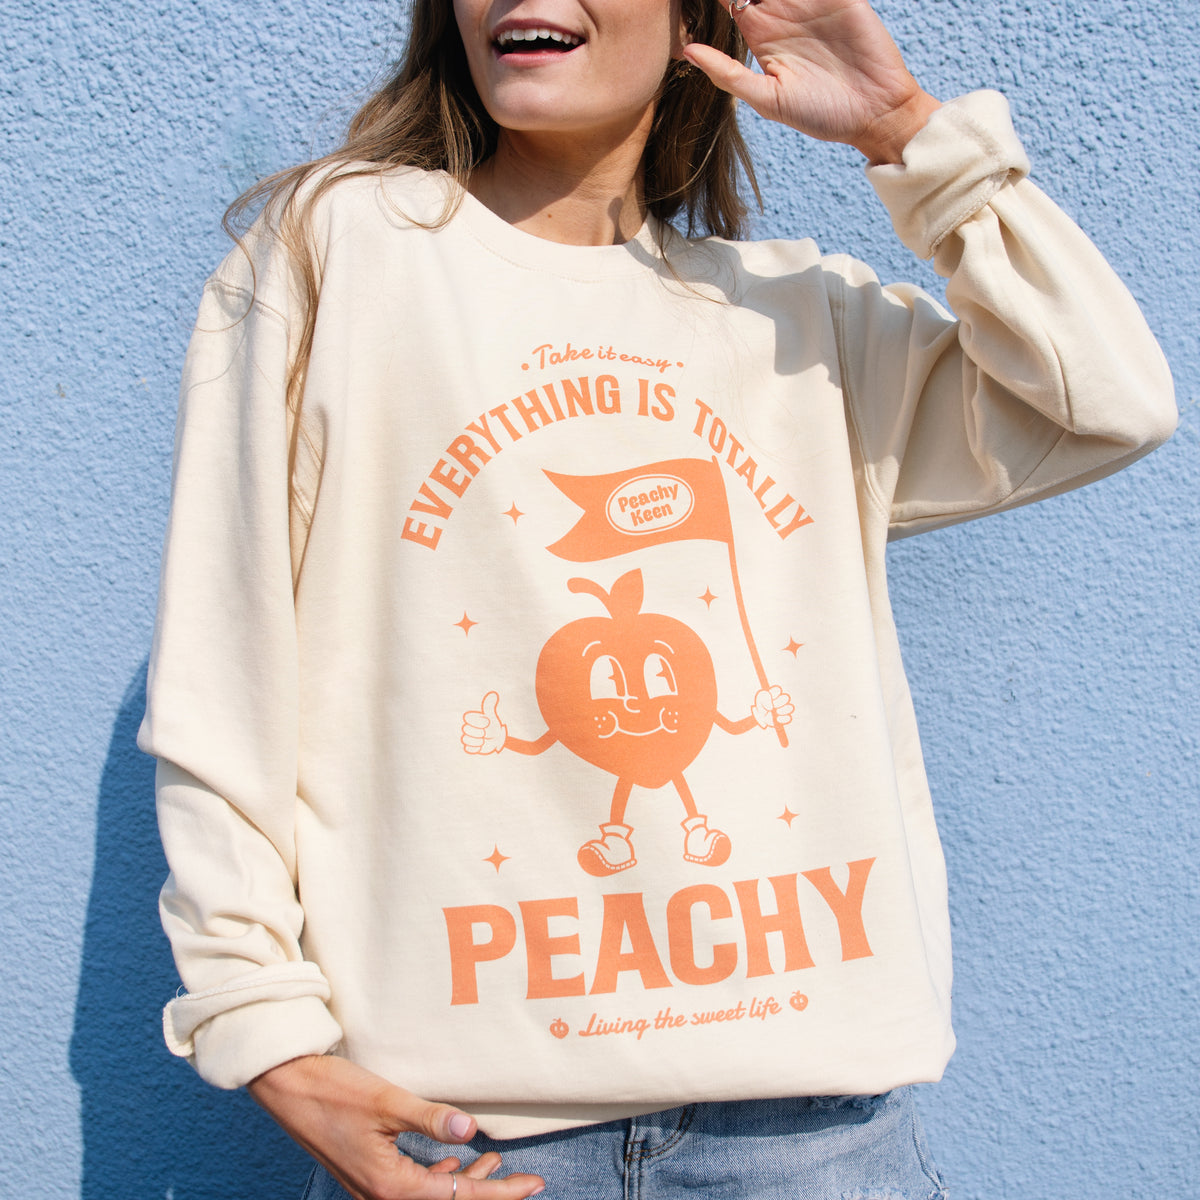 Boobs and Oversized Shirts- The Battle! - It's Peachy Keen